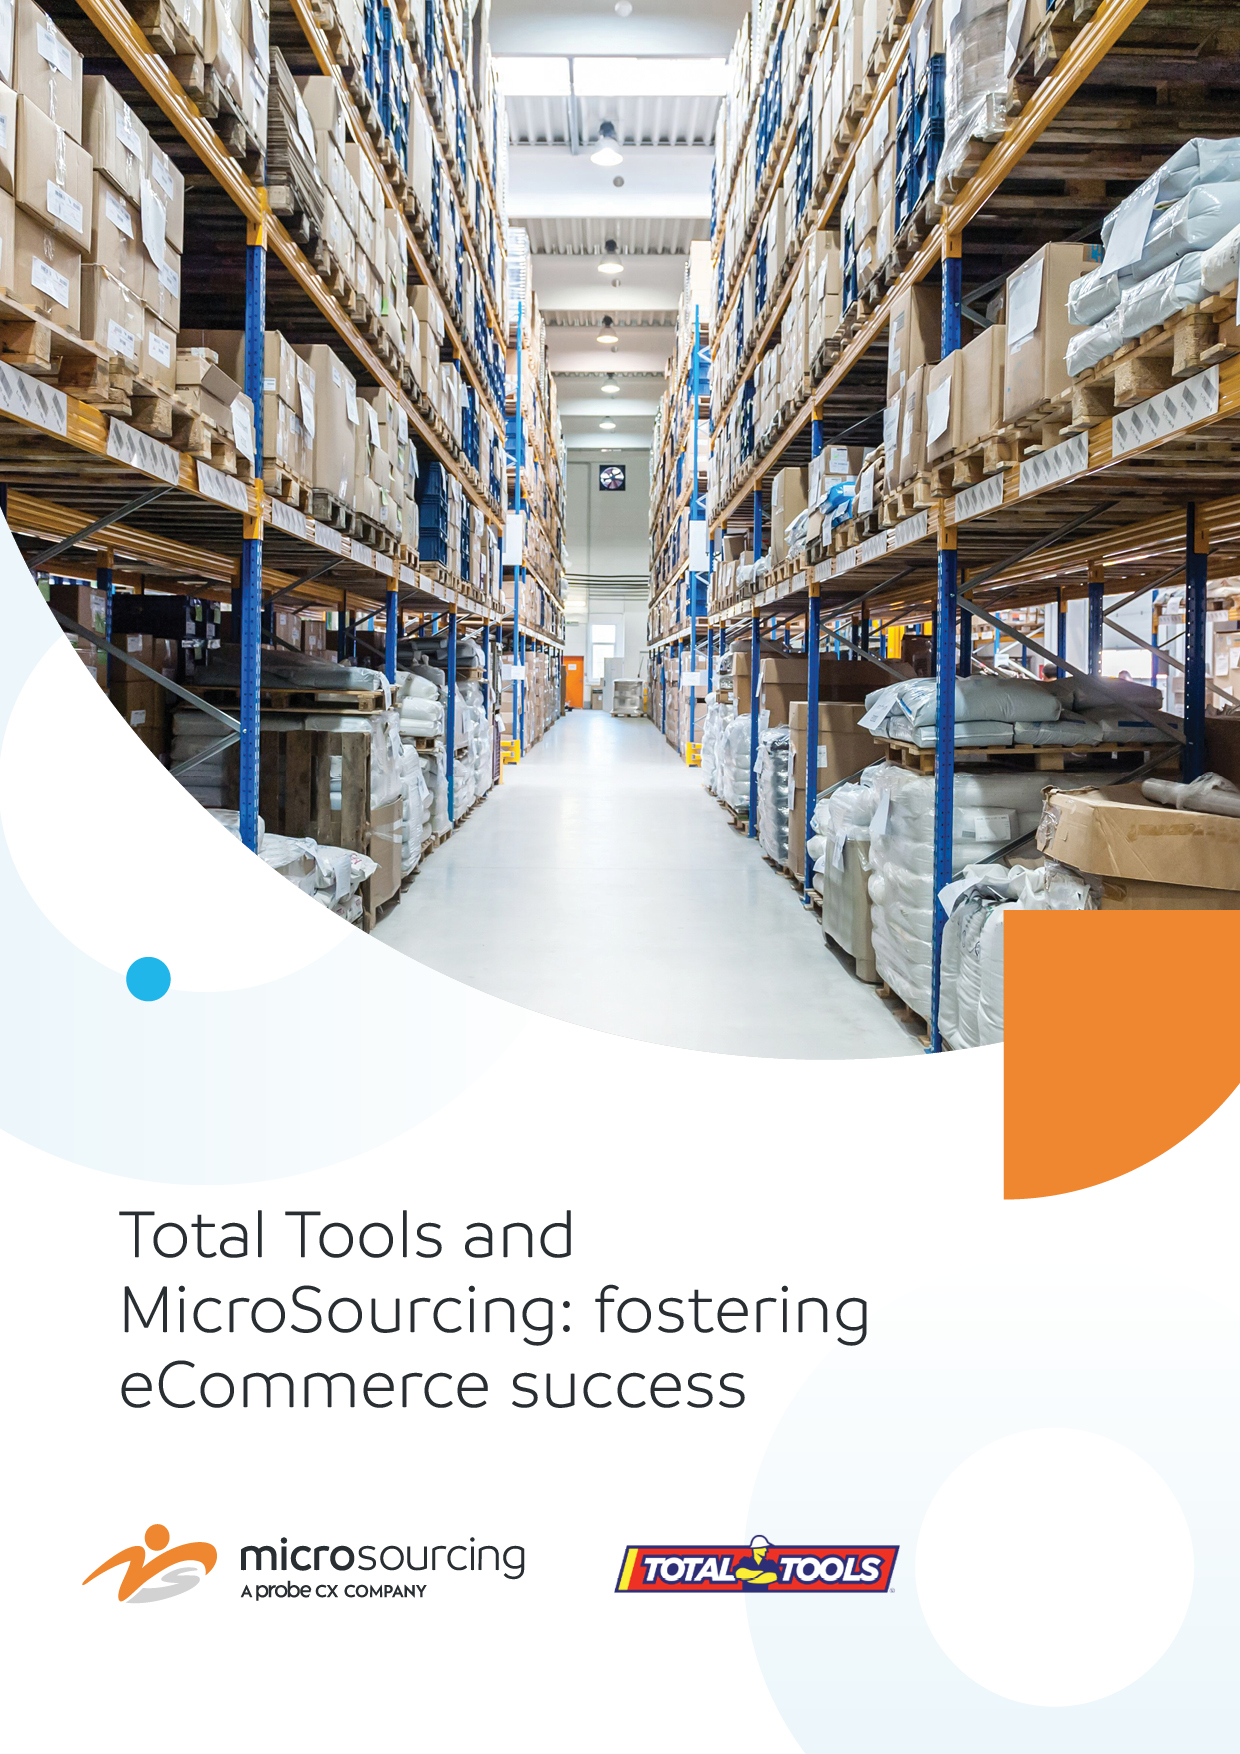 M_CaseStudy_Total Tools and MicroSourcing-fostering eCommerce success